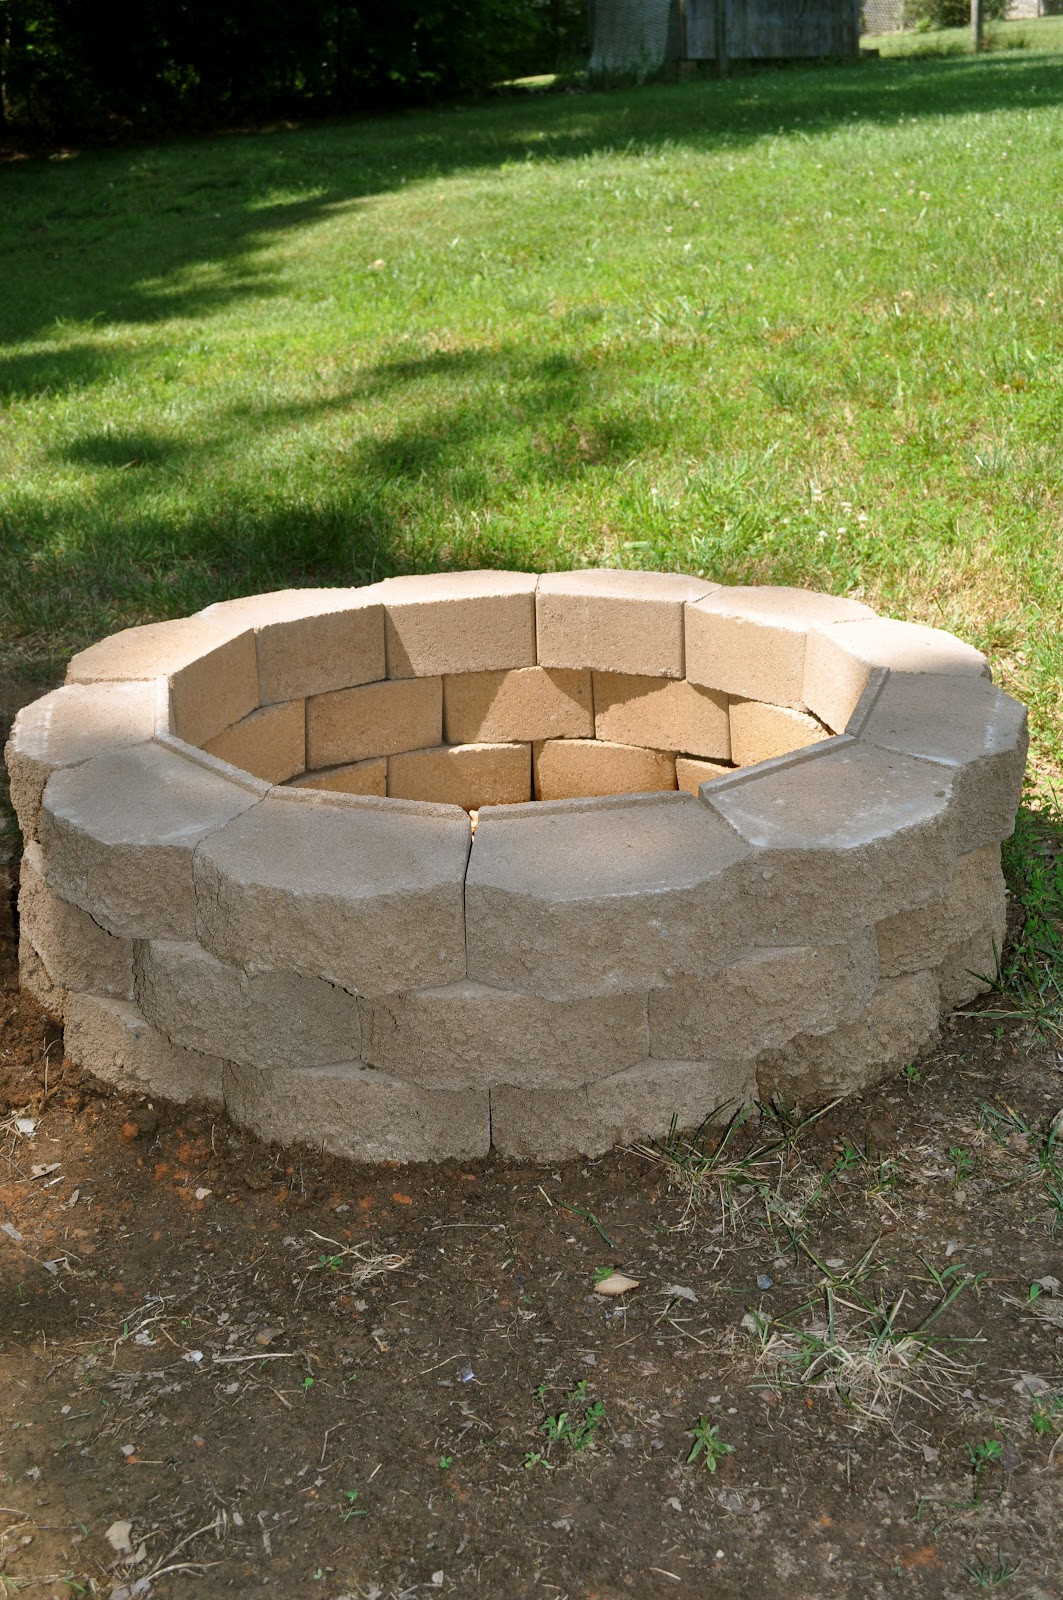 DIY Outdoor Brick Fireplace
 Diy brick fire pit Make Your Own Fire Pit at Home